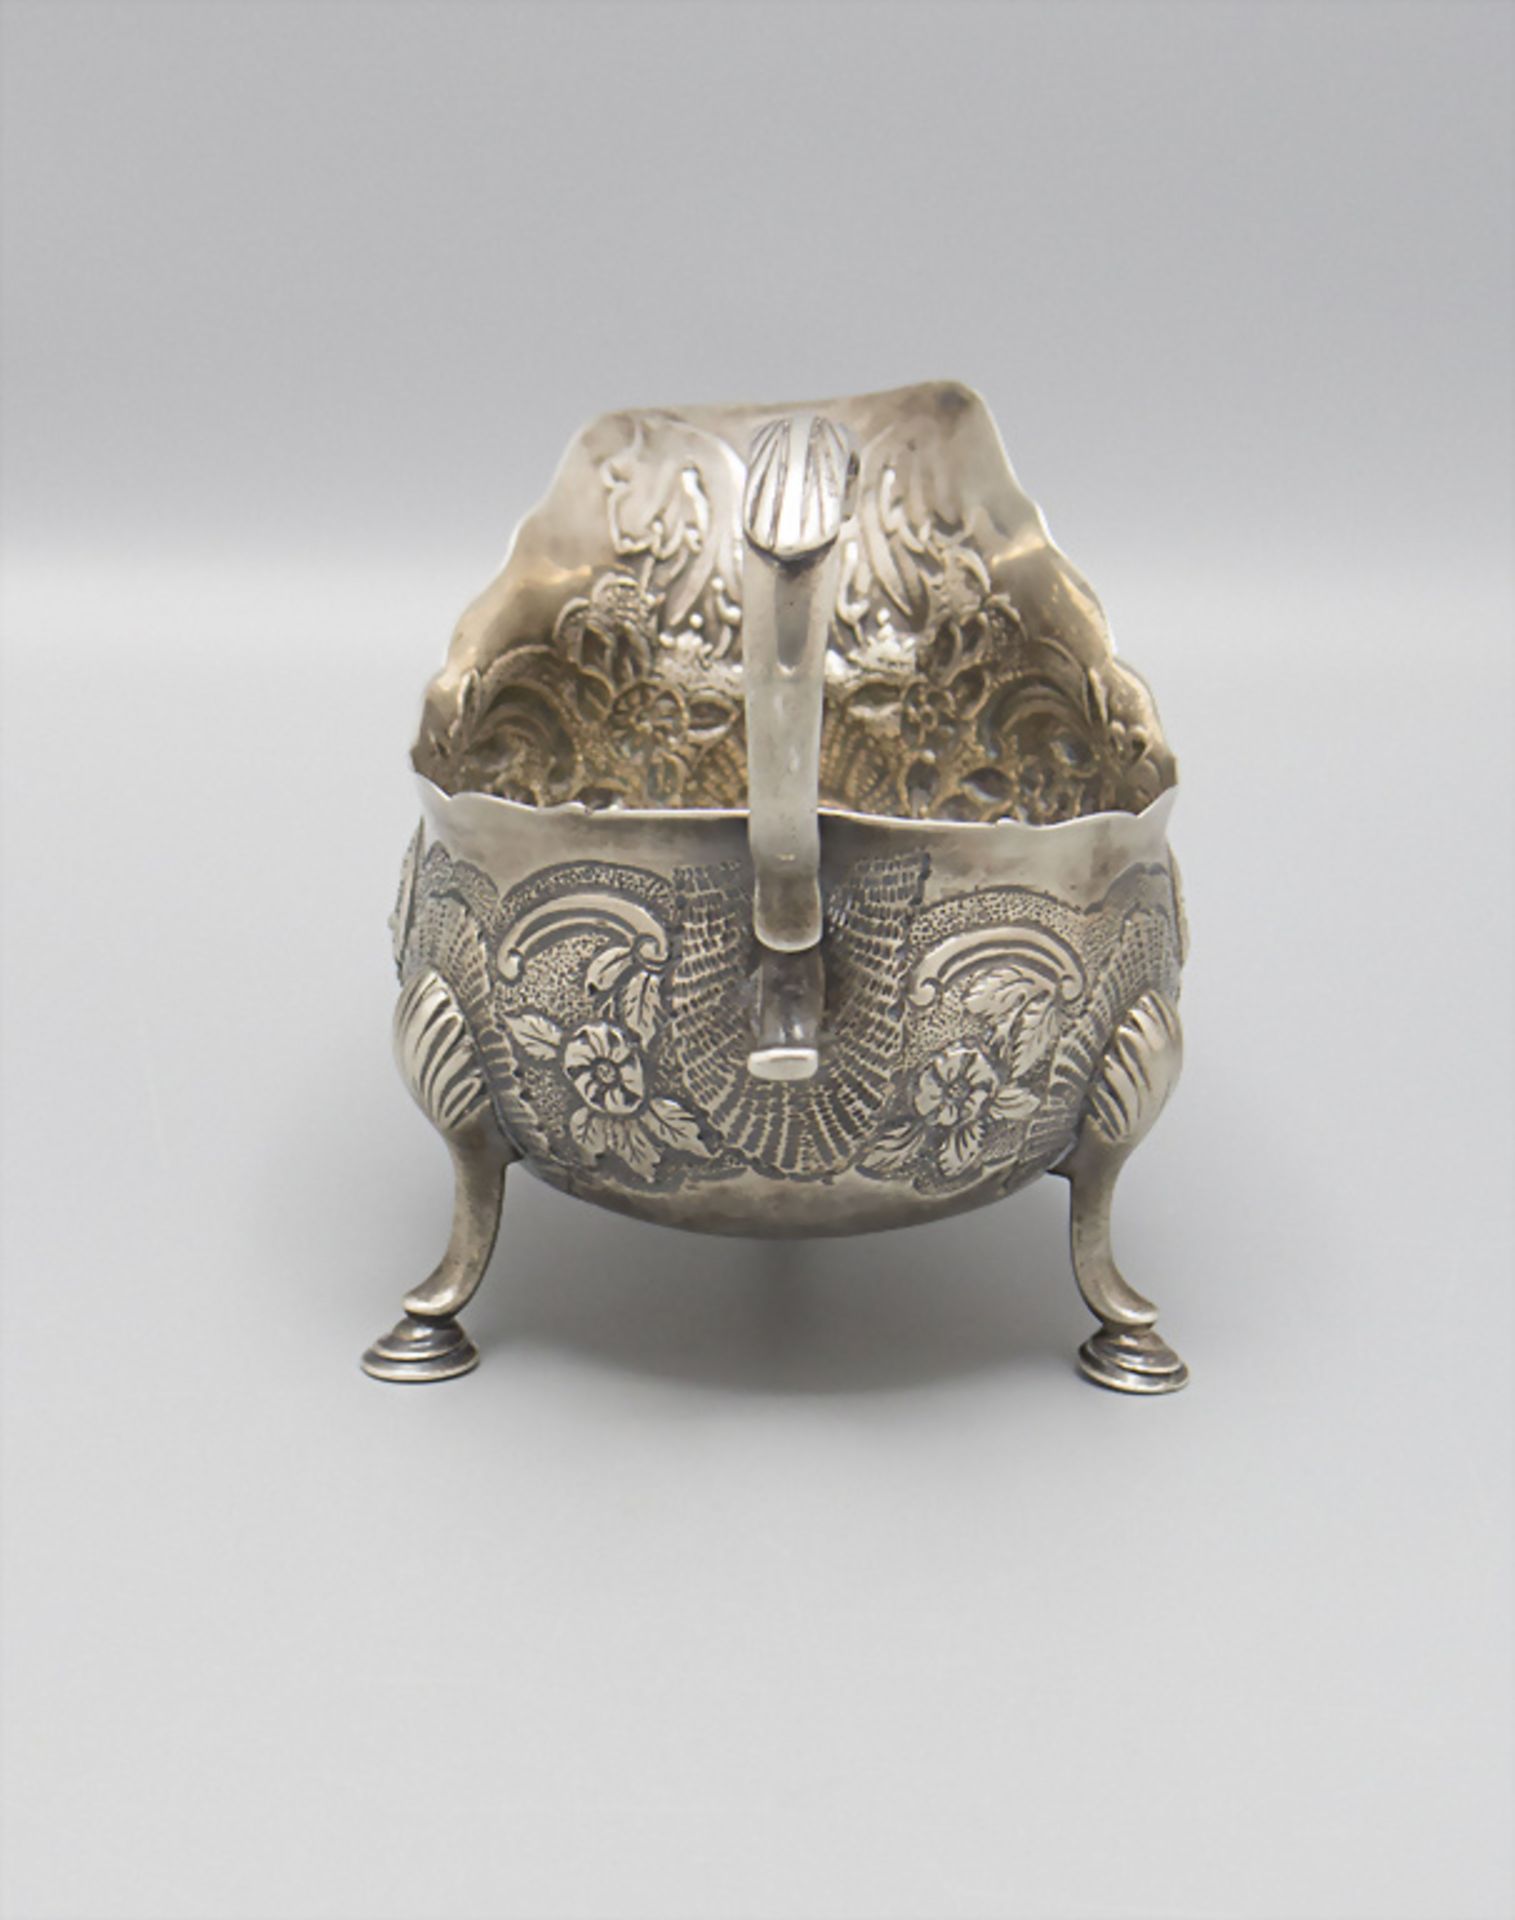 George II Sauciere / A silver George II sauce boat, David Hennell, London, 1762 - Image 4 of 7